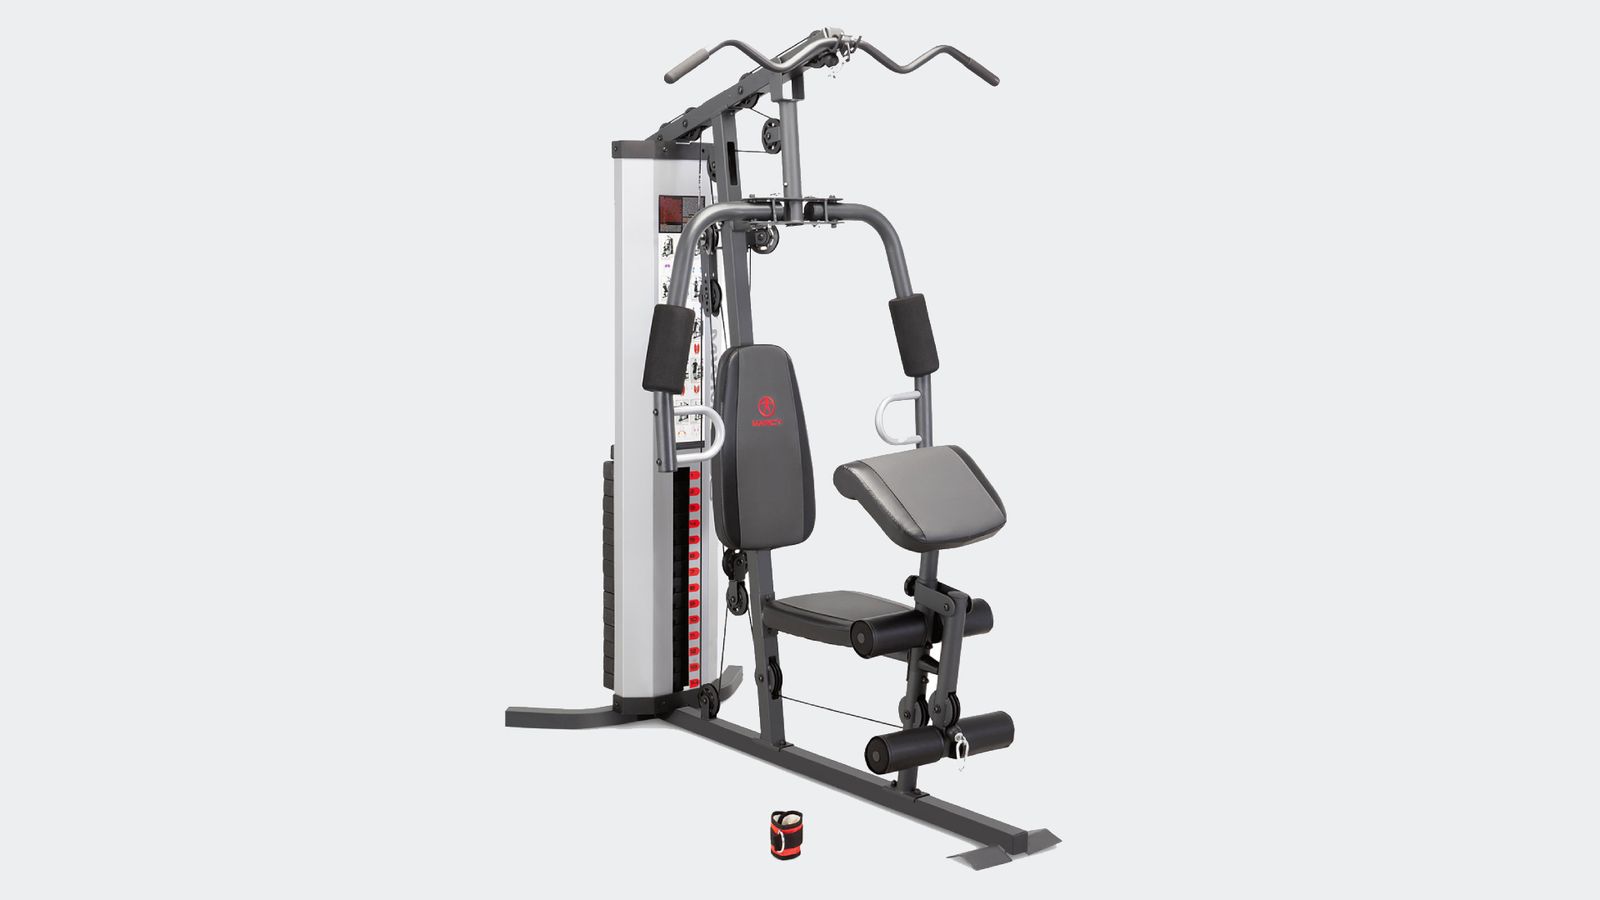 Marcy MWM-988 product image of a black seat attached to a black-framed multi gym.